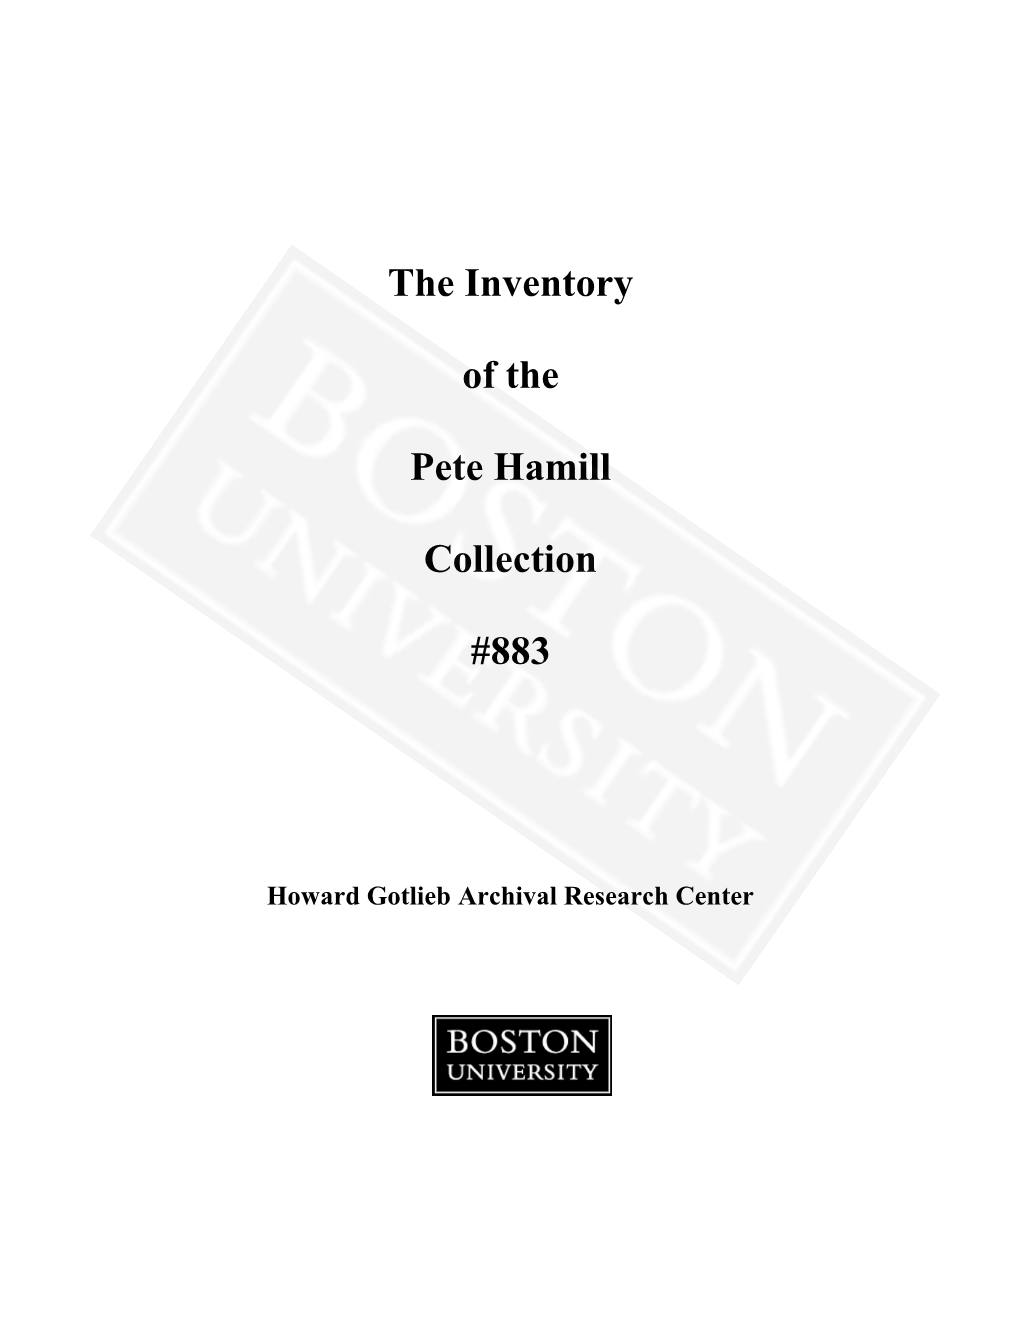 The Inventory of the Pete Hamill Collection #883